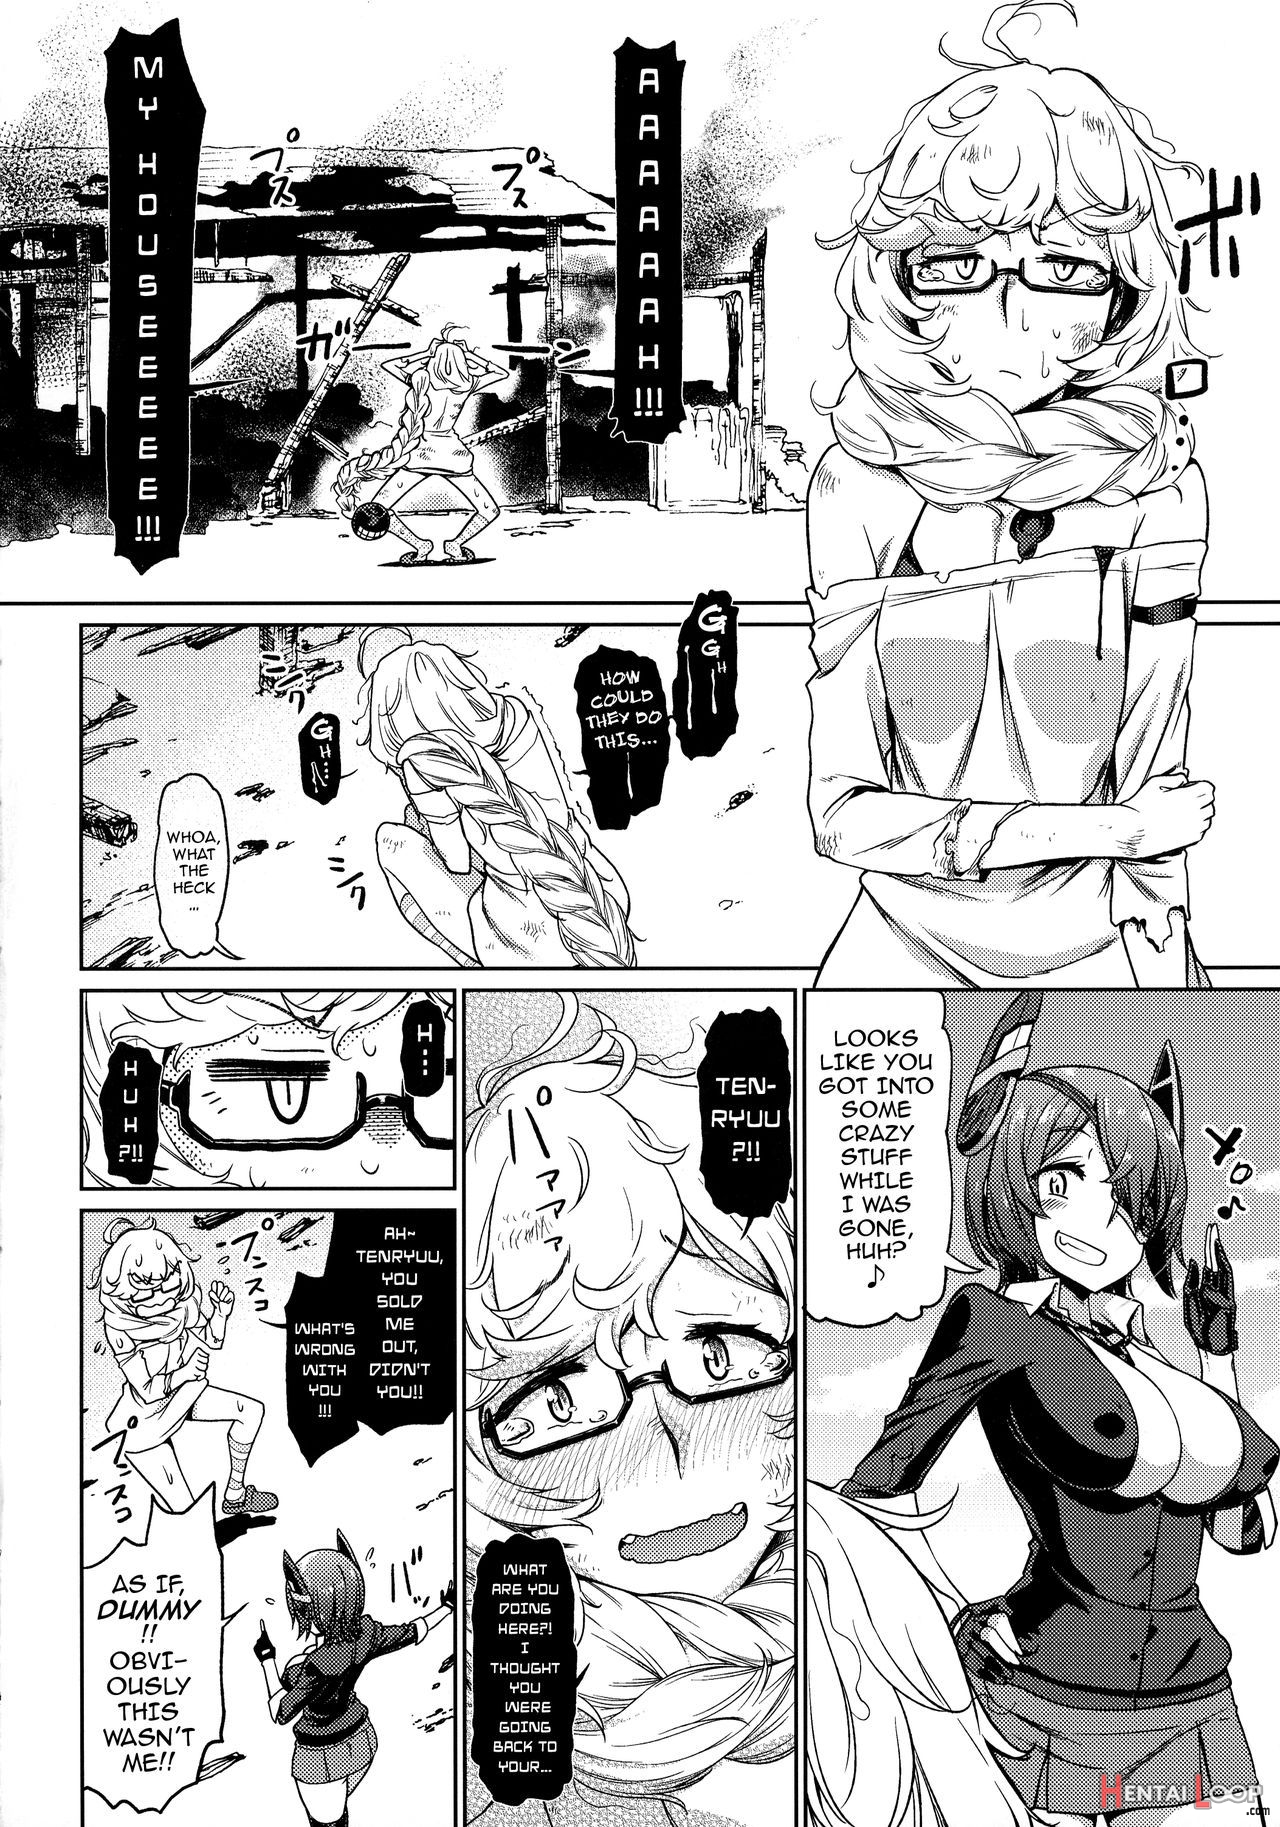 I Told You Supply Depot, This Tenryuu Belongs To You!! page 45